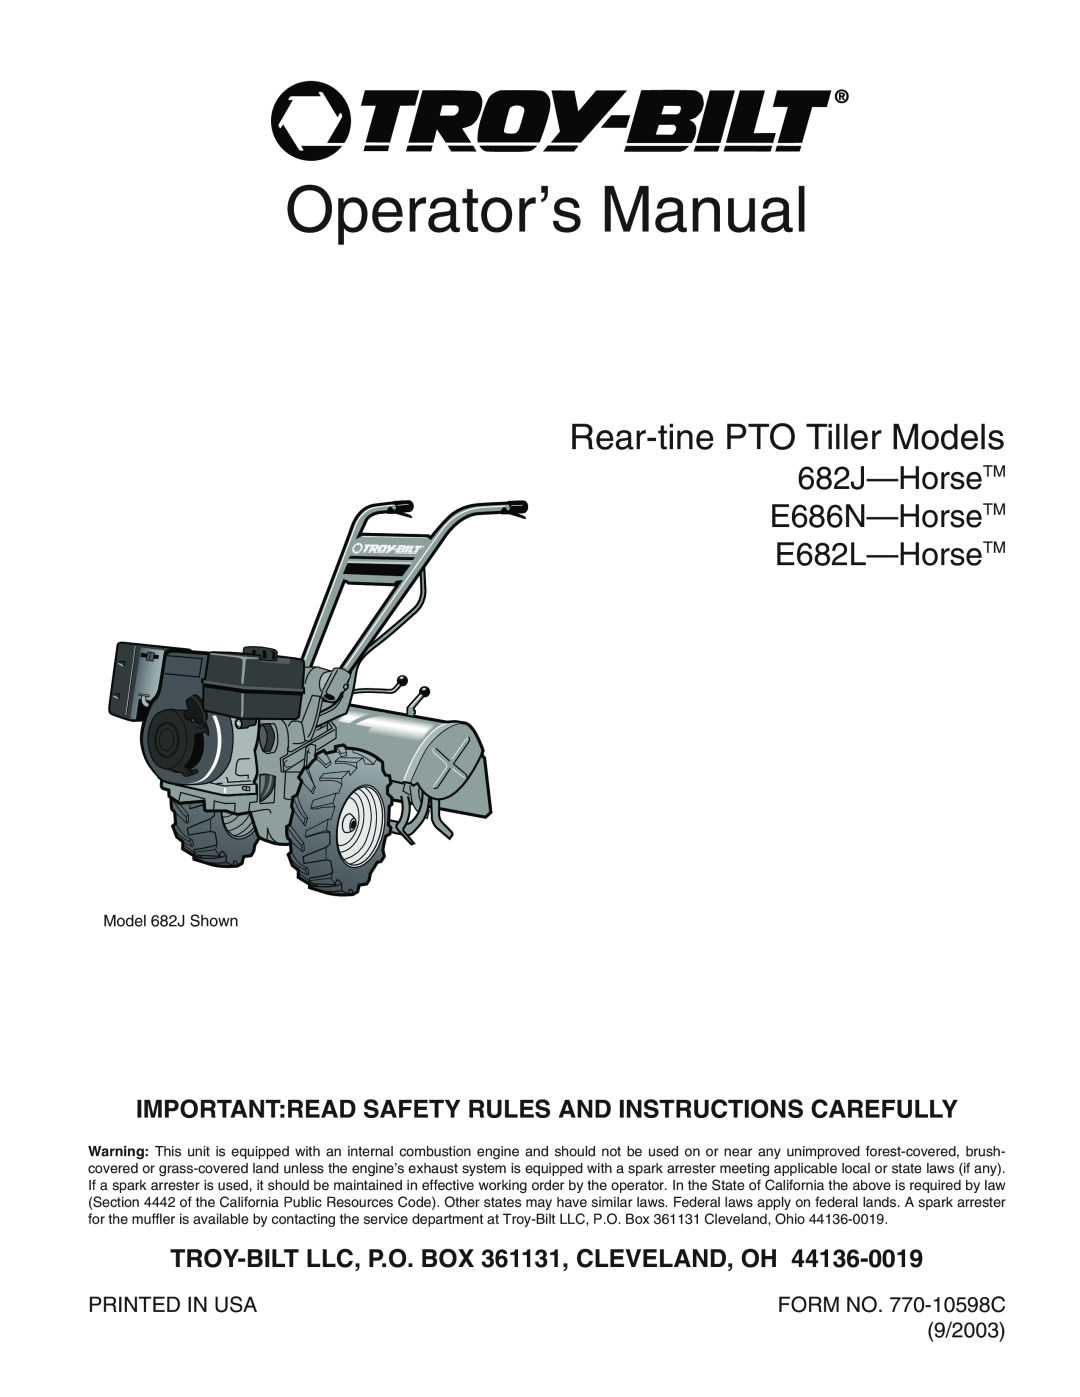 Troy-Bilt E686N manual Importantread Safety Rules And Instructions Carefully, Printed In Usa, FORM NO. 770-10598C, 9/2003 